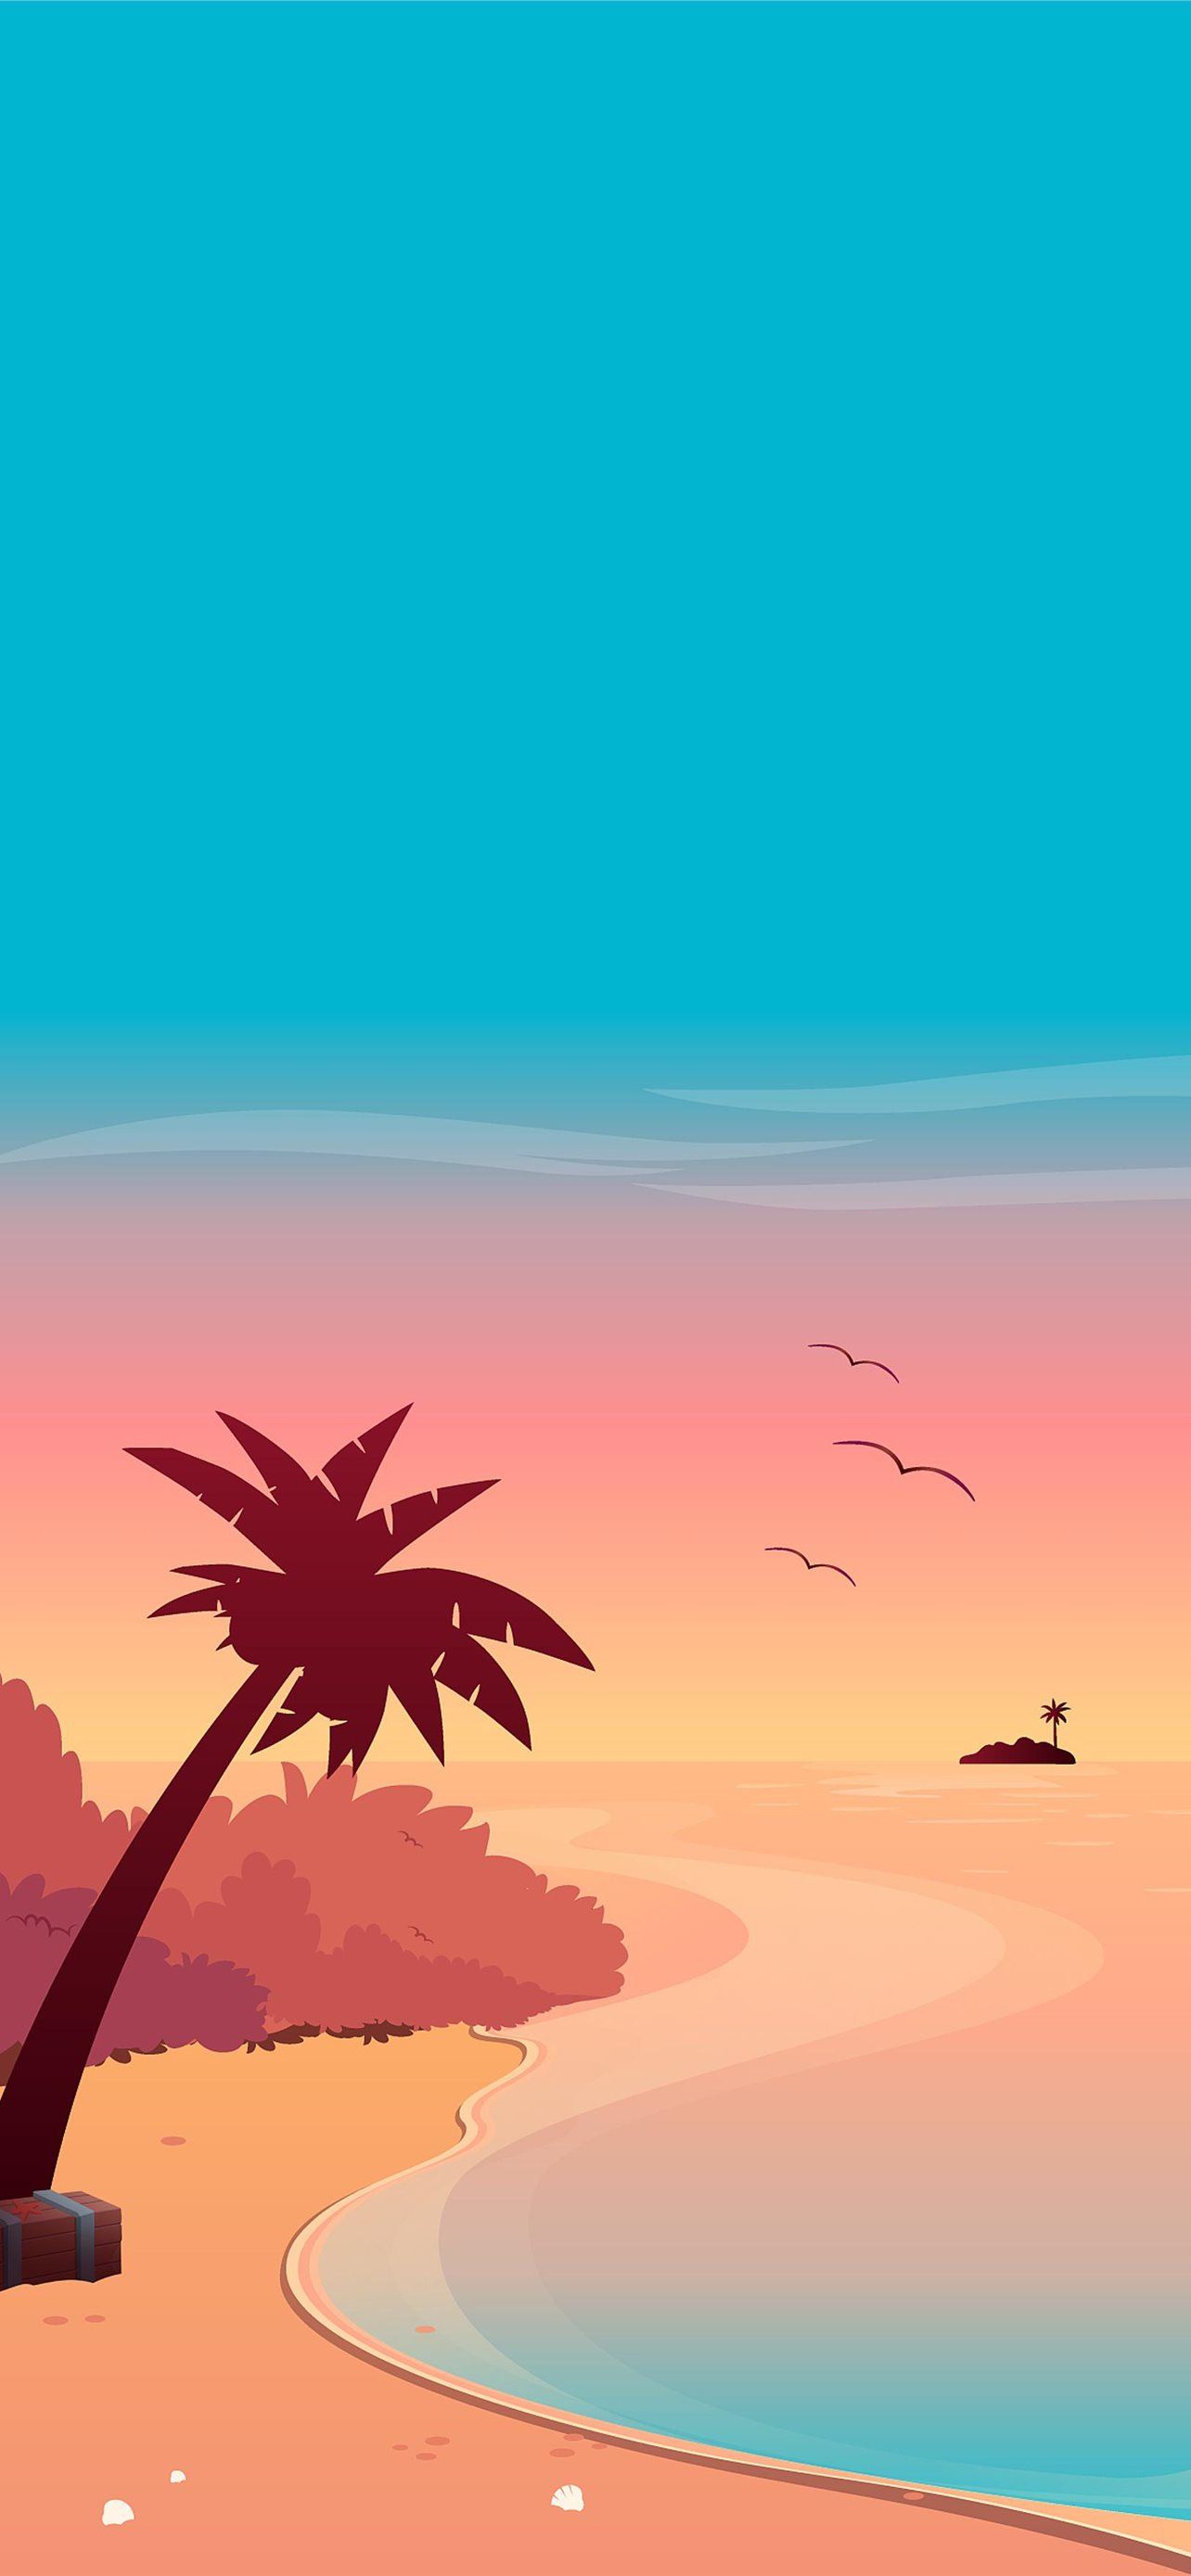 Summer artwork cave iphone wallpapers free download